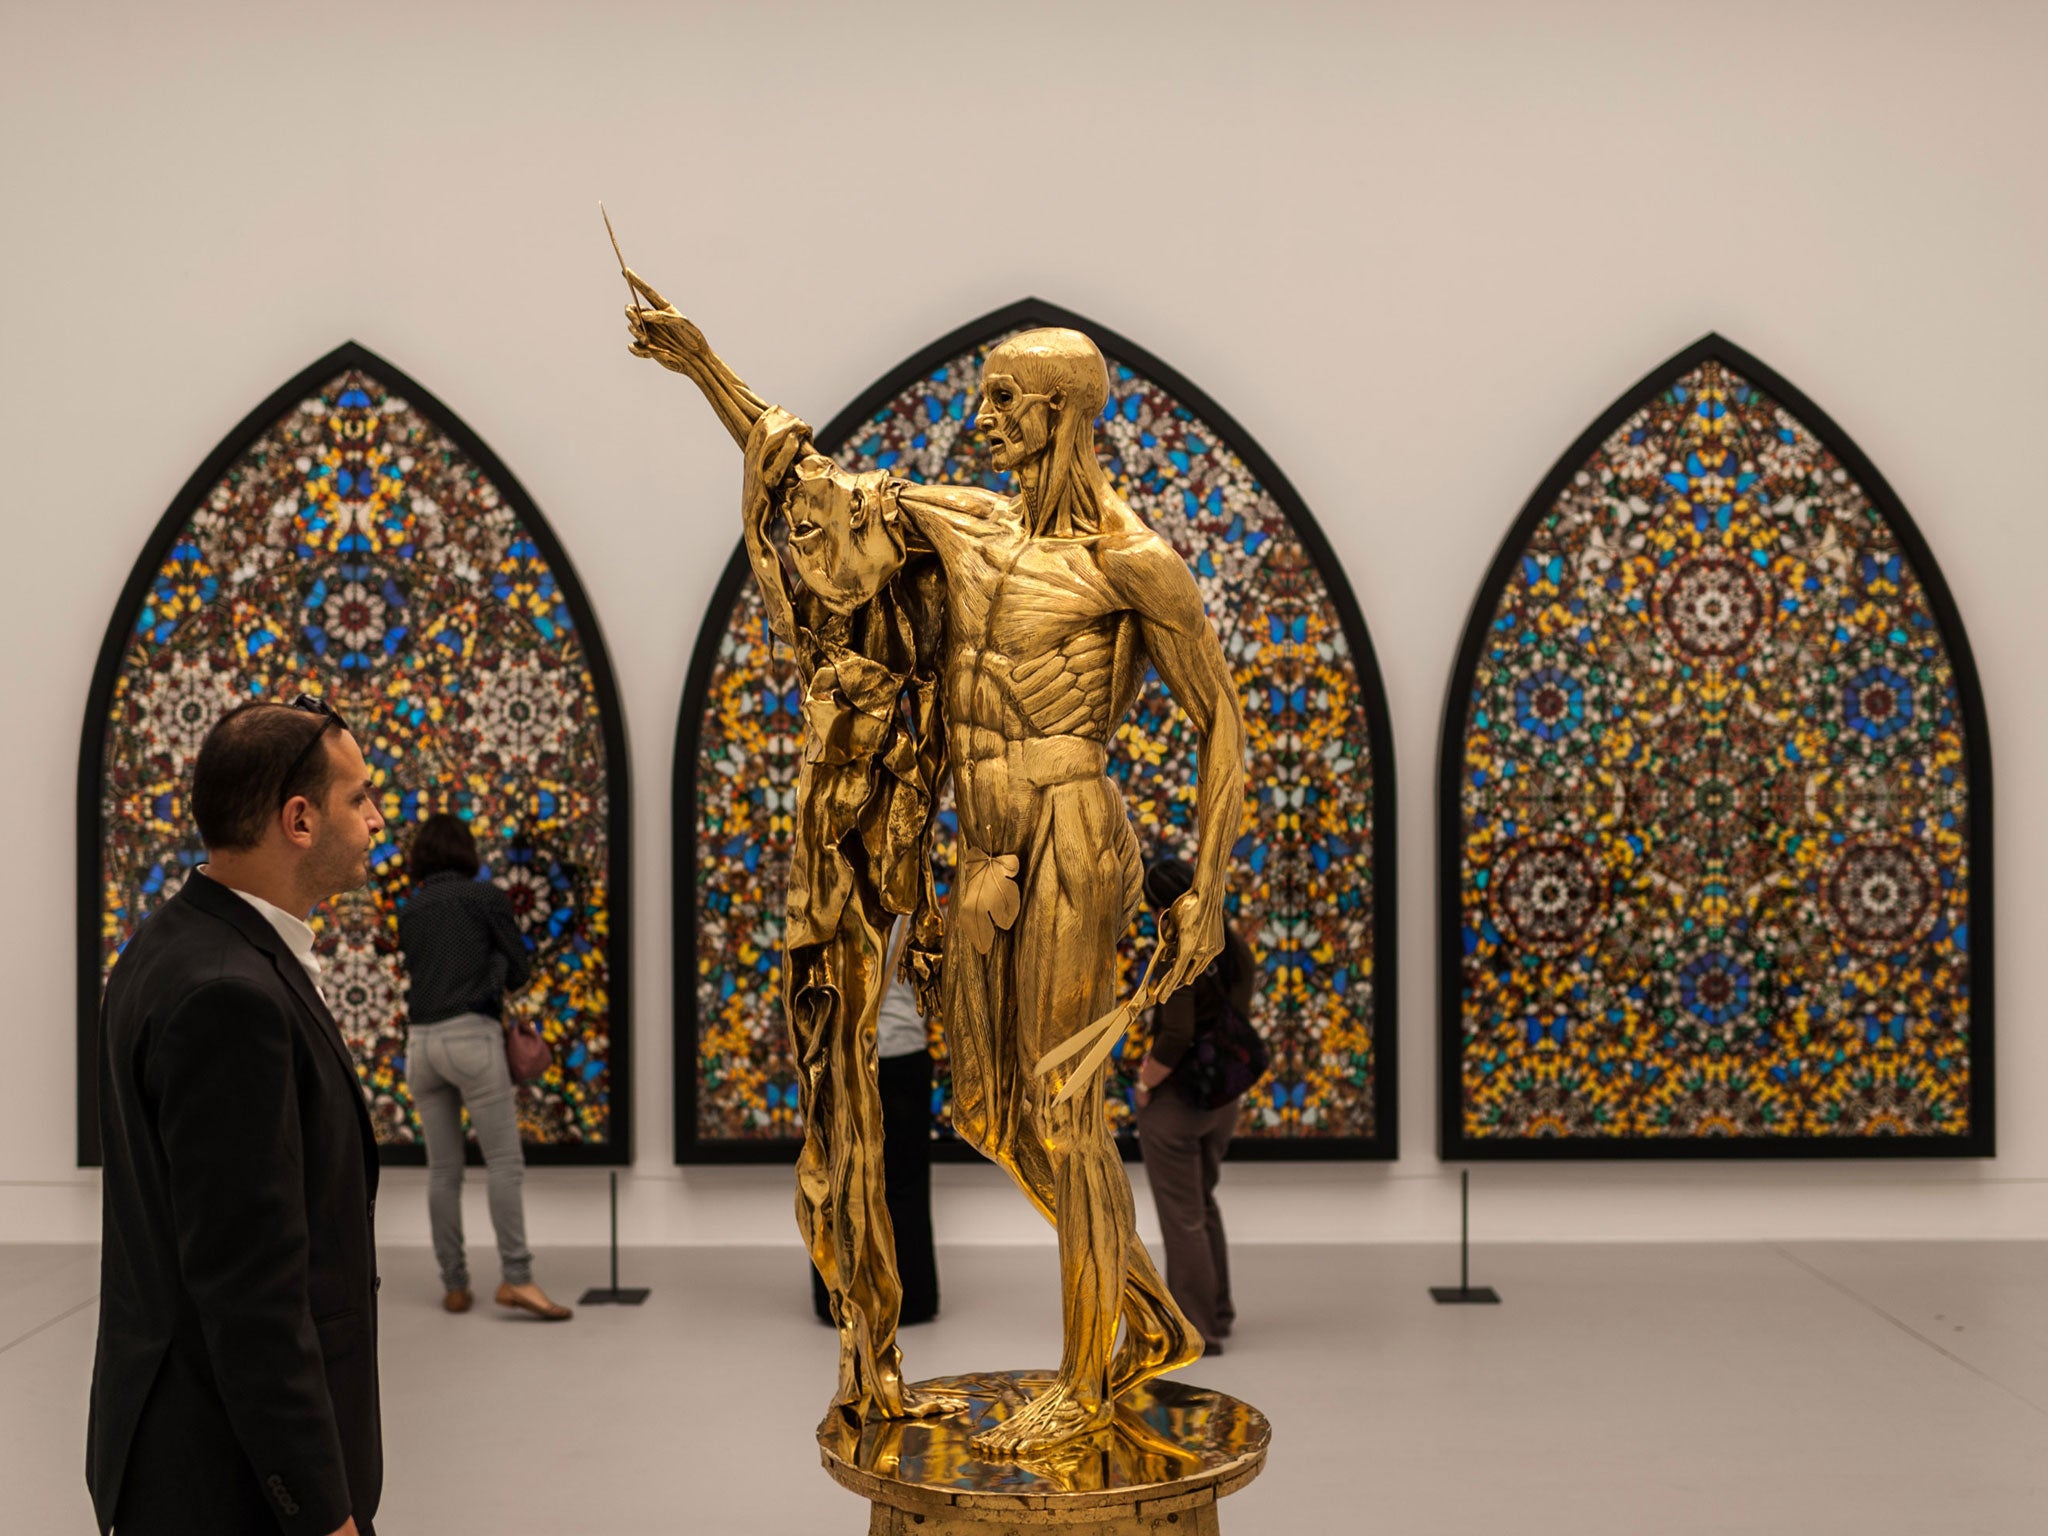 Damien Hirst's 'Saint Bartholomew, Exquisite Pain' has been altered to appease more conservative audiences